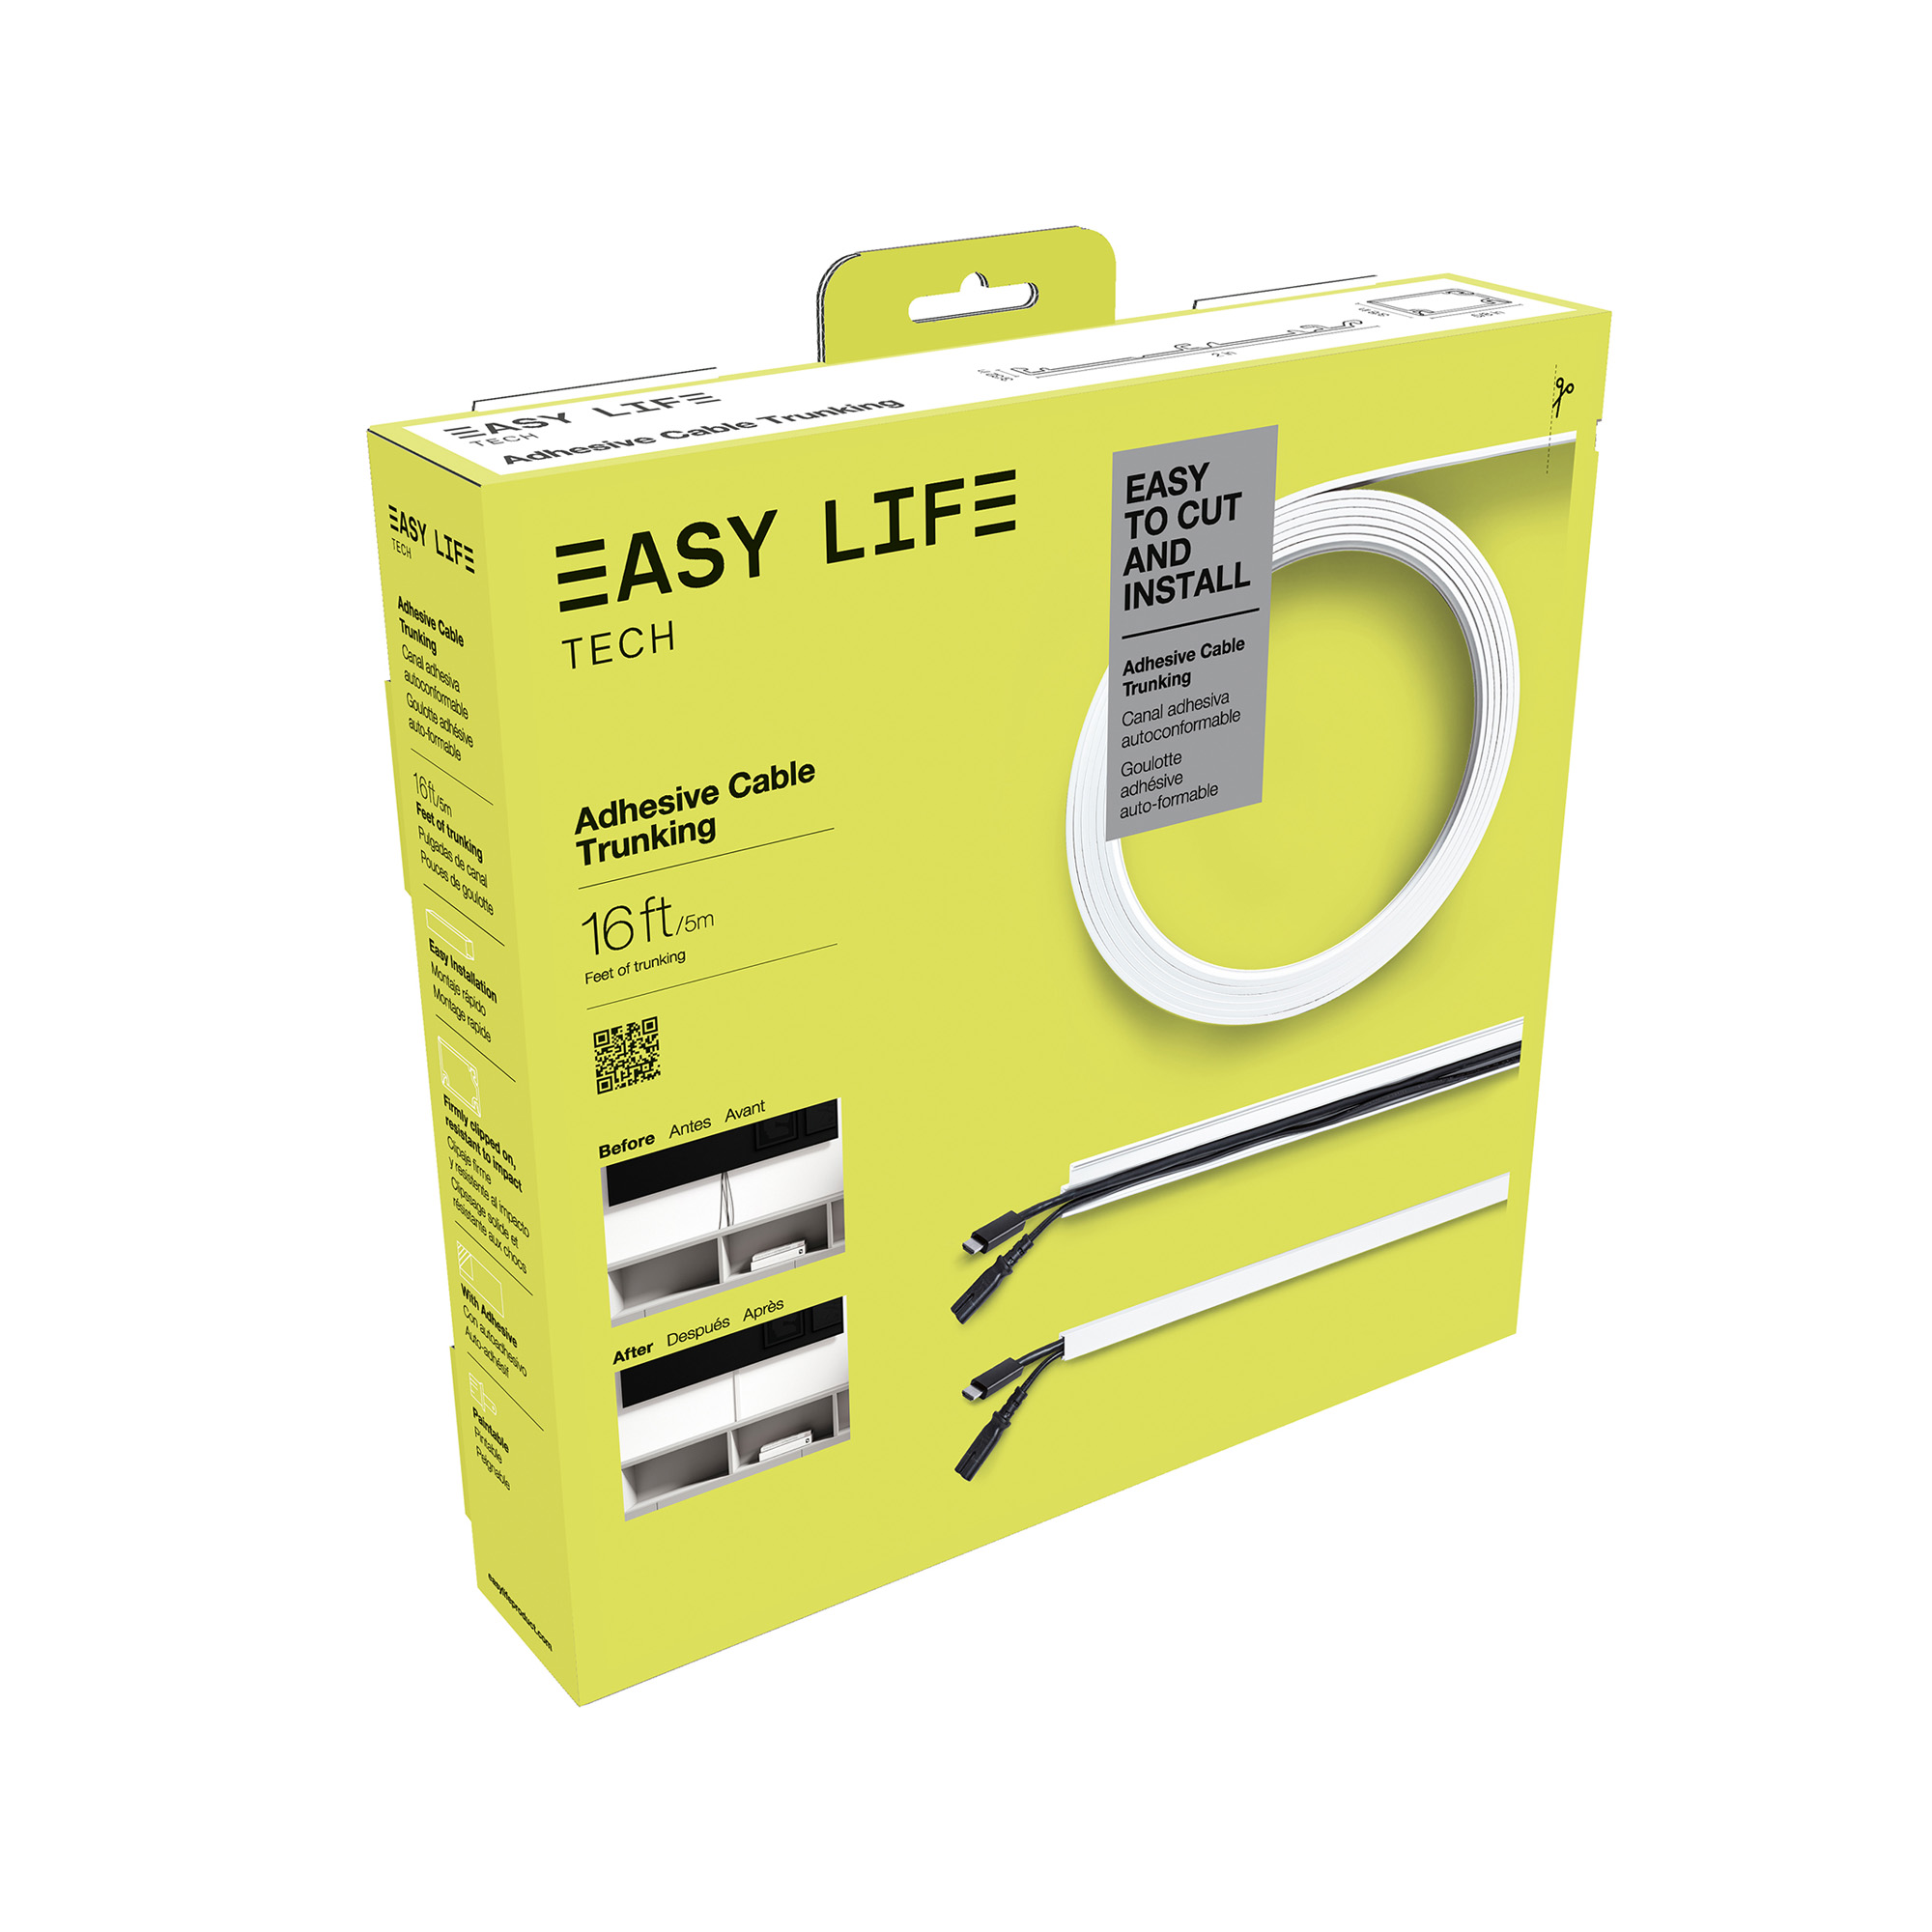 Easylife Tech Cable Management Kit 10 ft White 0.98 x 0.63 x 30 inch